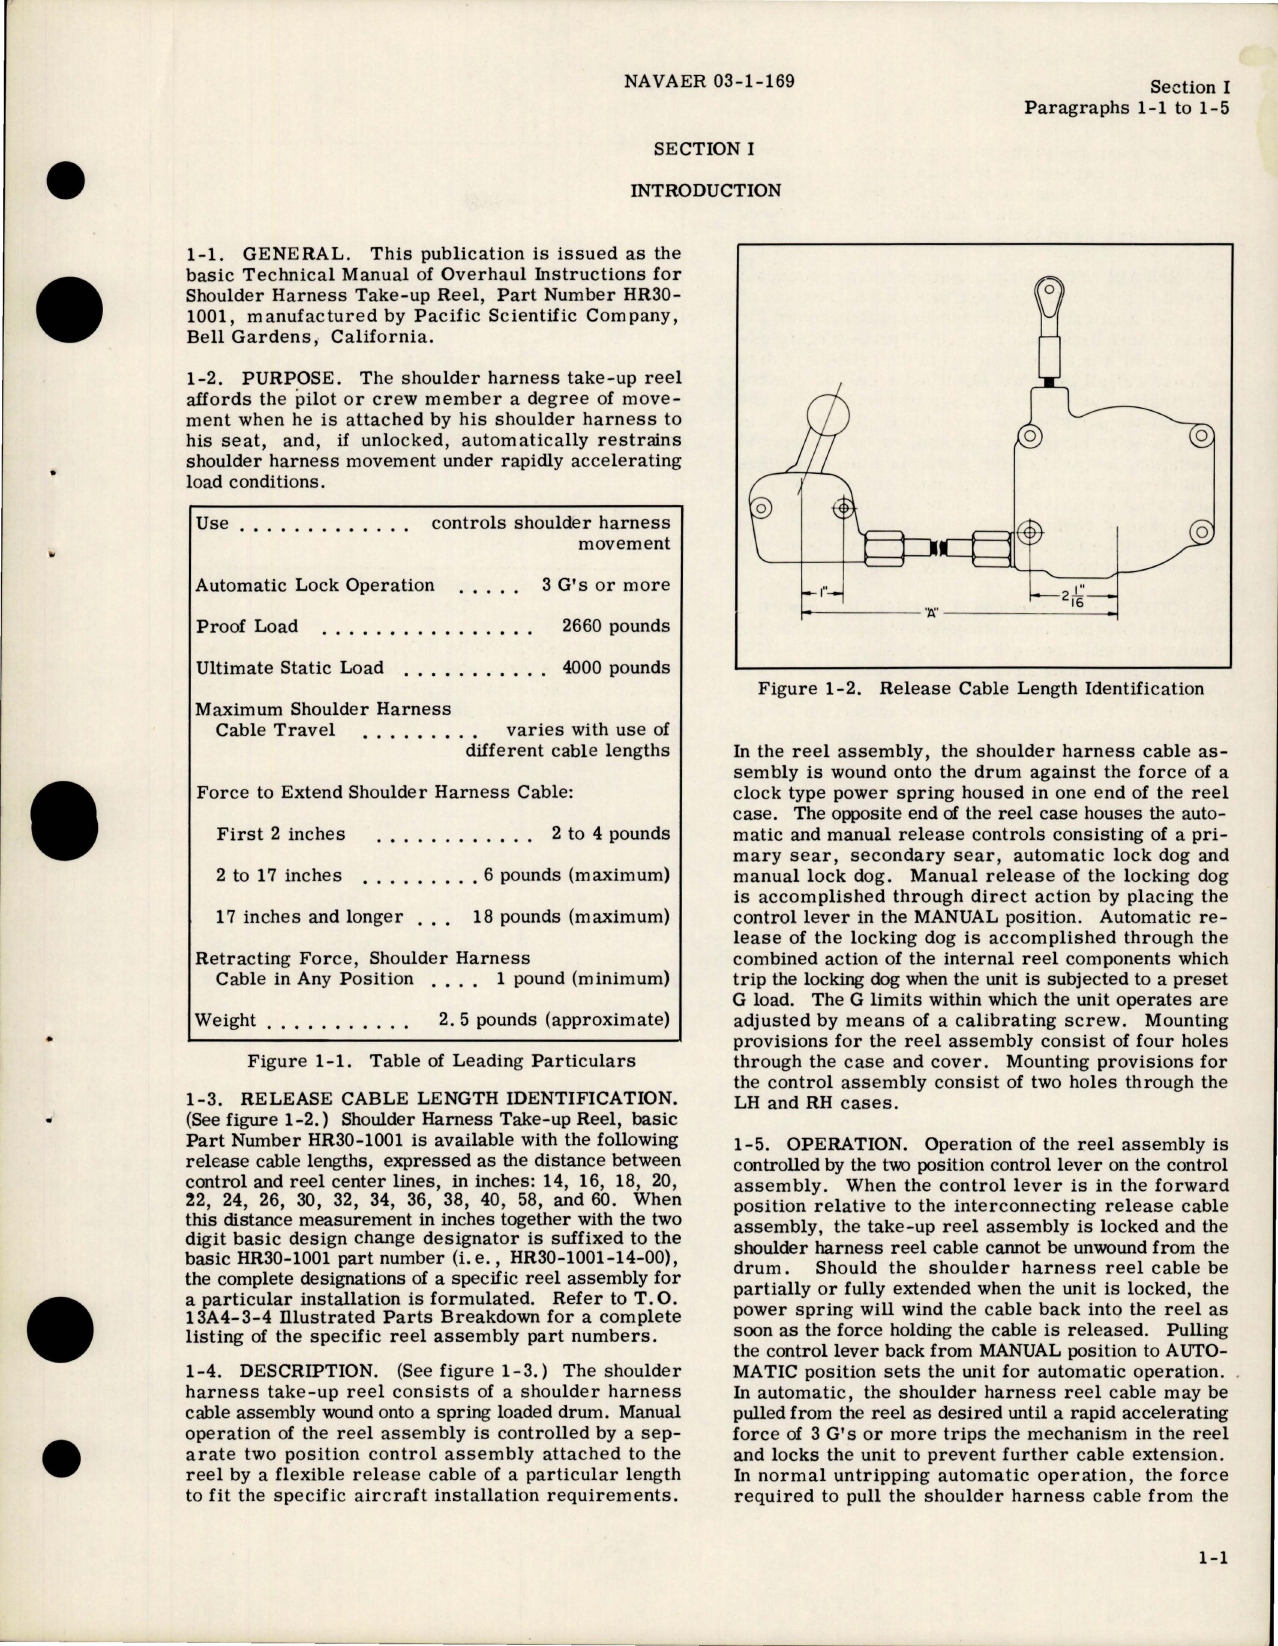 Sample page 5 from AirCorps Library document: Overhaul Instructions for Shoulder Harness Take-Up Reels